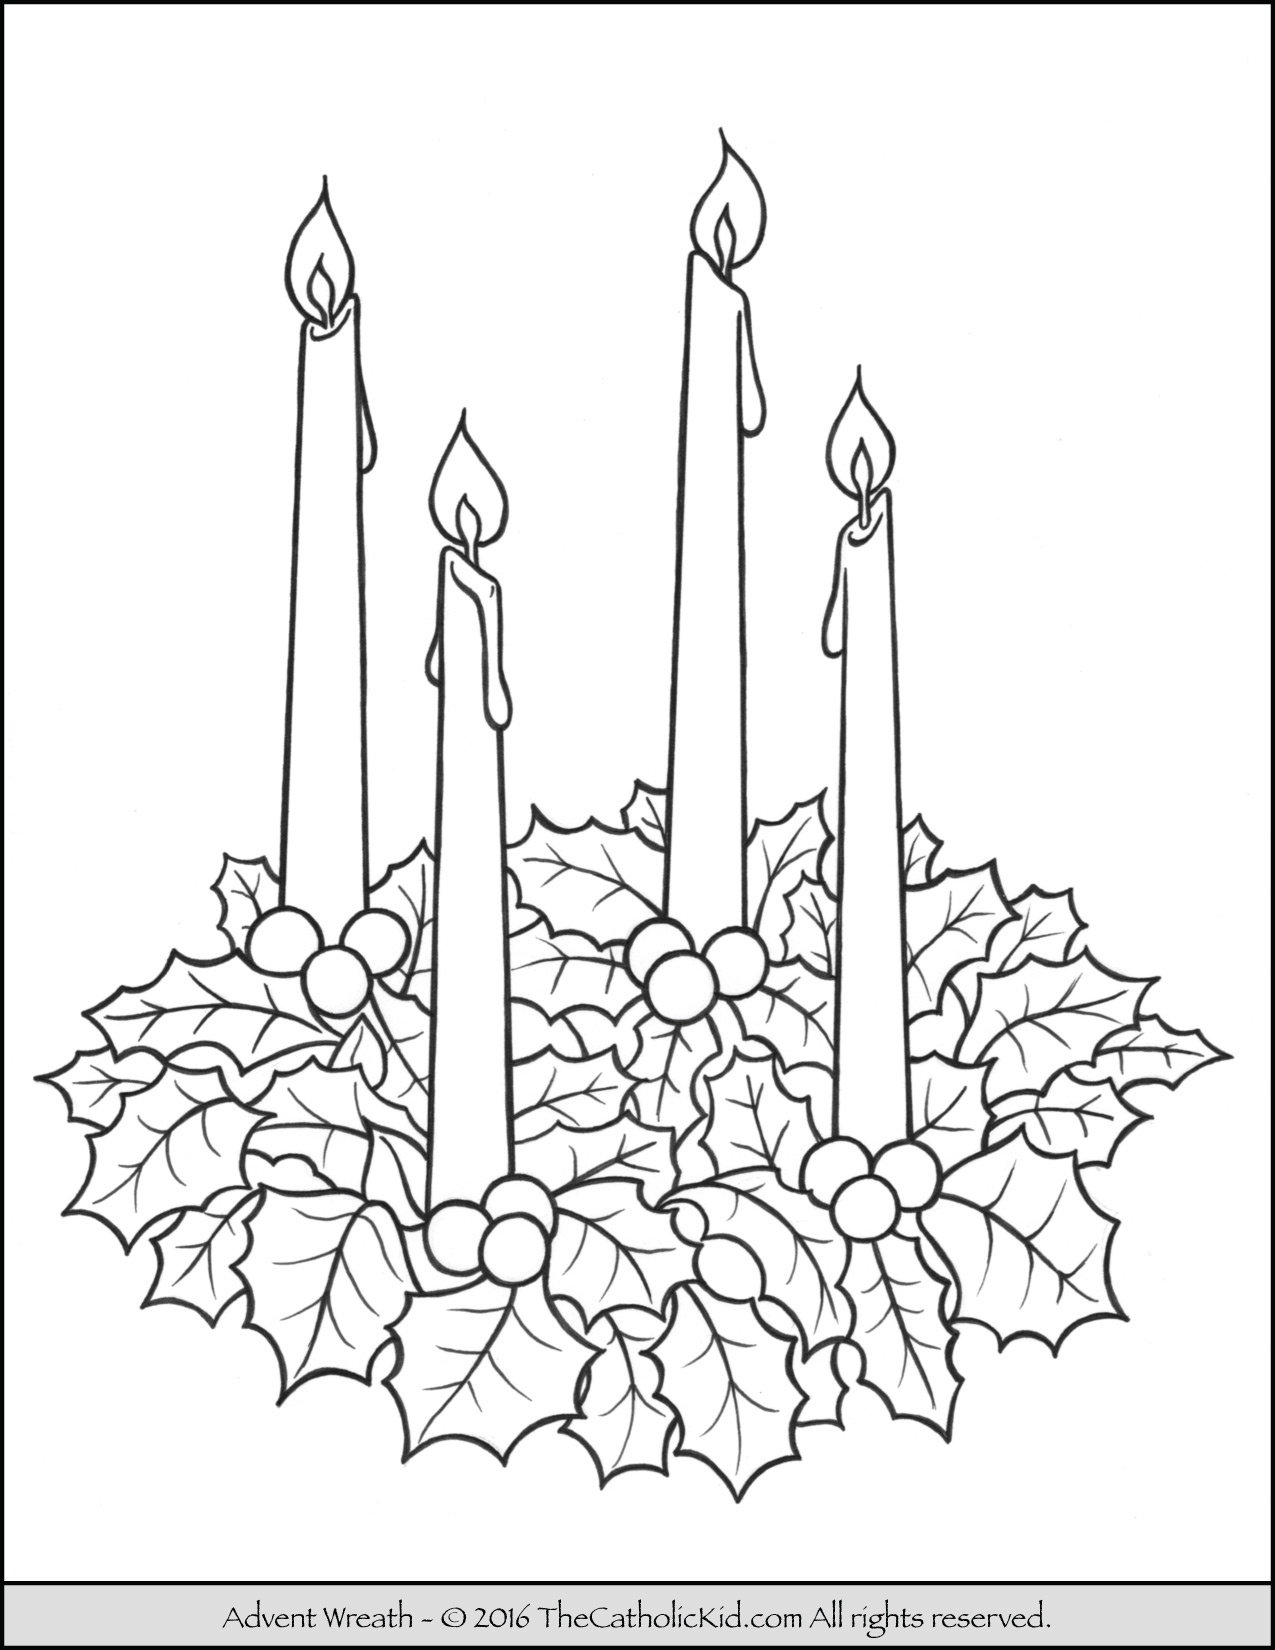 advent-wreath-coloring-page-free-printable-advent-wreath-free